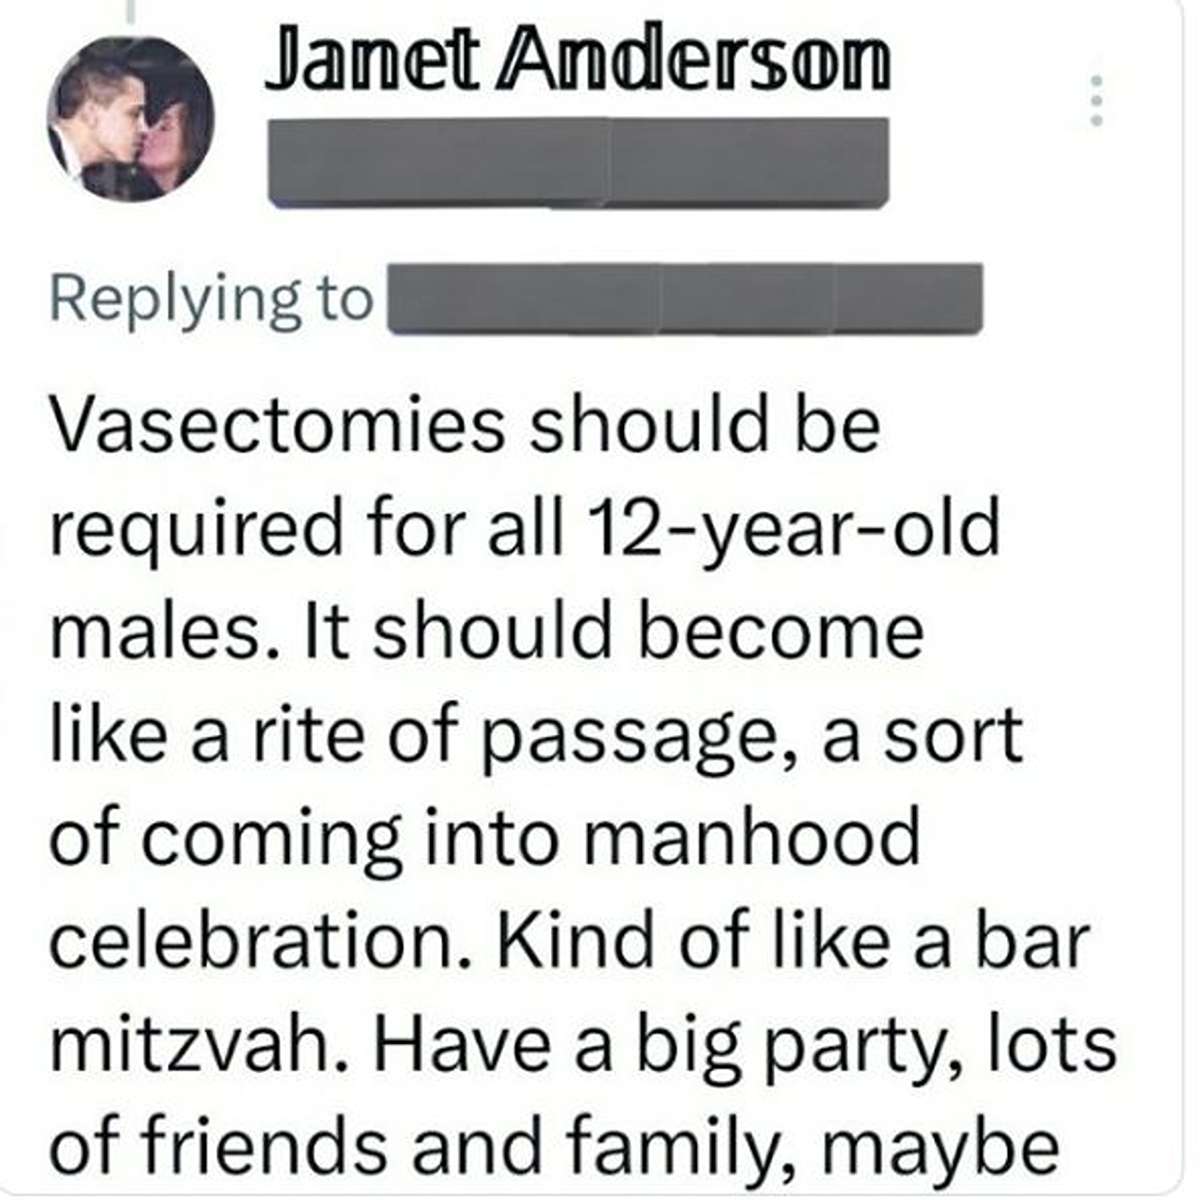 delusional people - paper - Janet Anderson ... Vasectomies should be required for all 12yearold males. It should become a rite of passage, a sort of coming into manhood celebration. Kind of a bar mitzvah. Have a big party, lots of friends and family, mayb